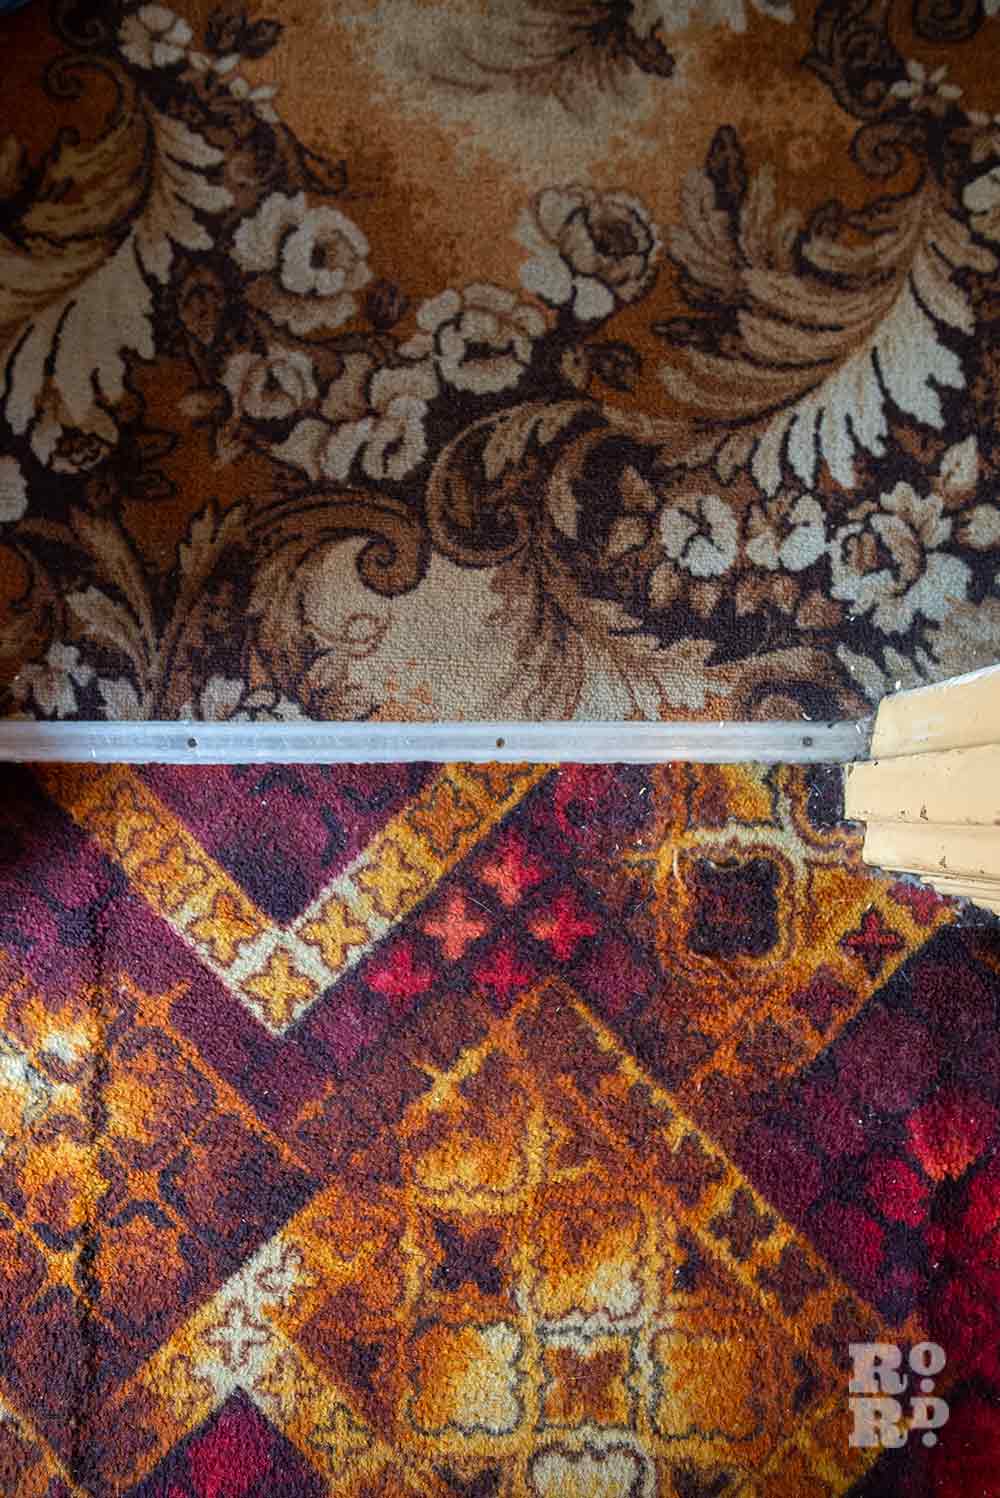 Patterned dark brown and floral 1970s carpet in a house on Lichfield Road, Bow, East London